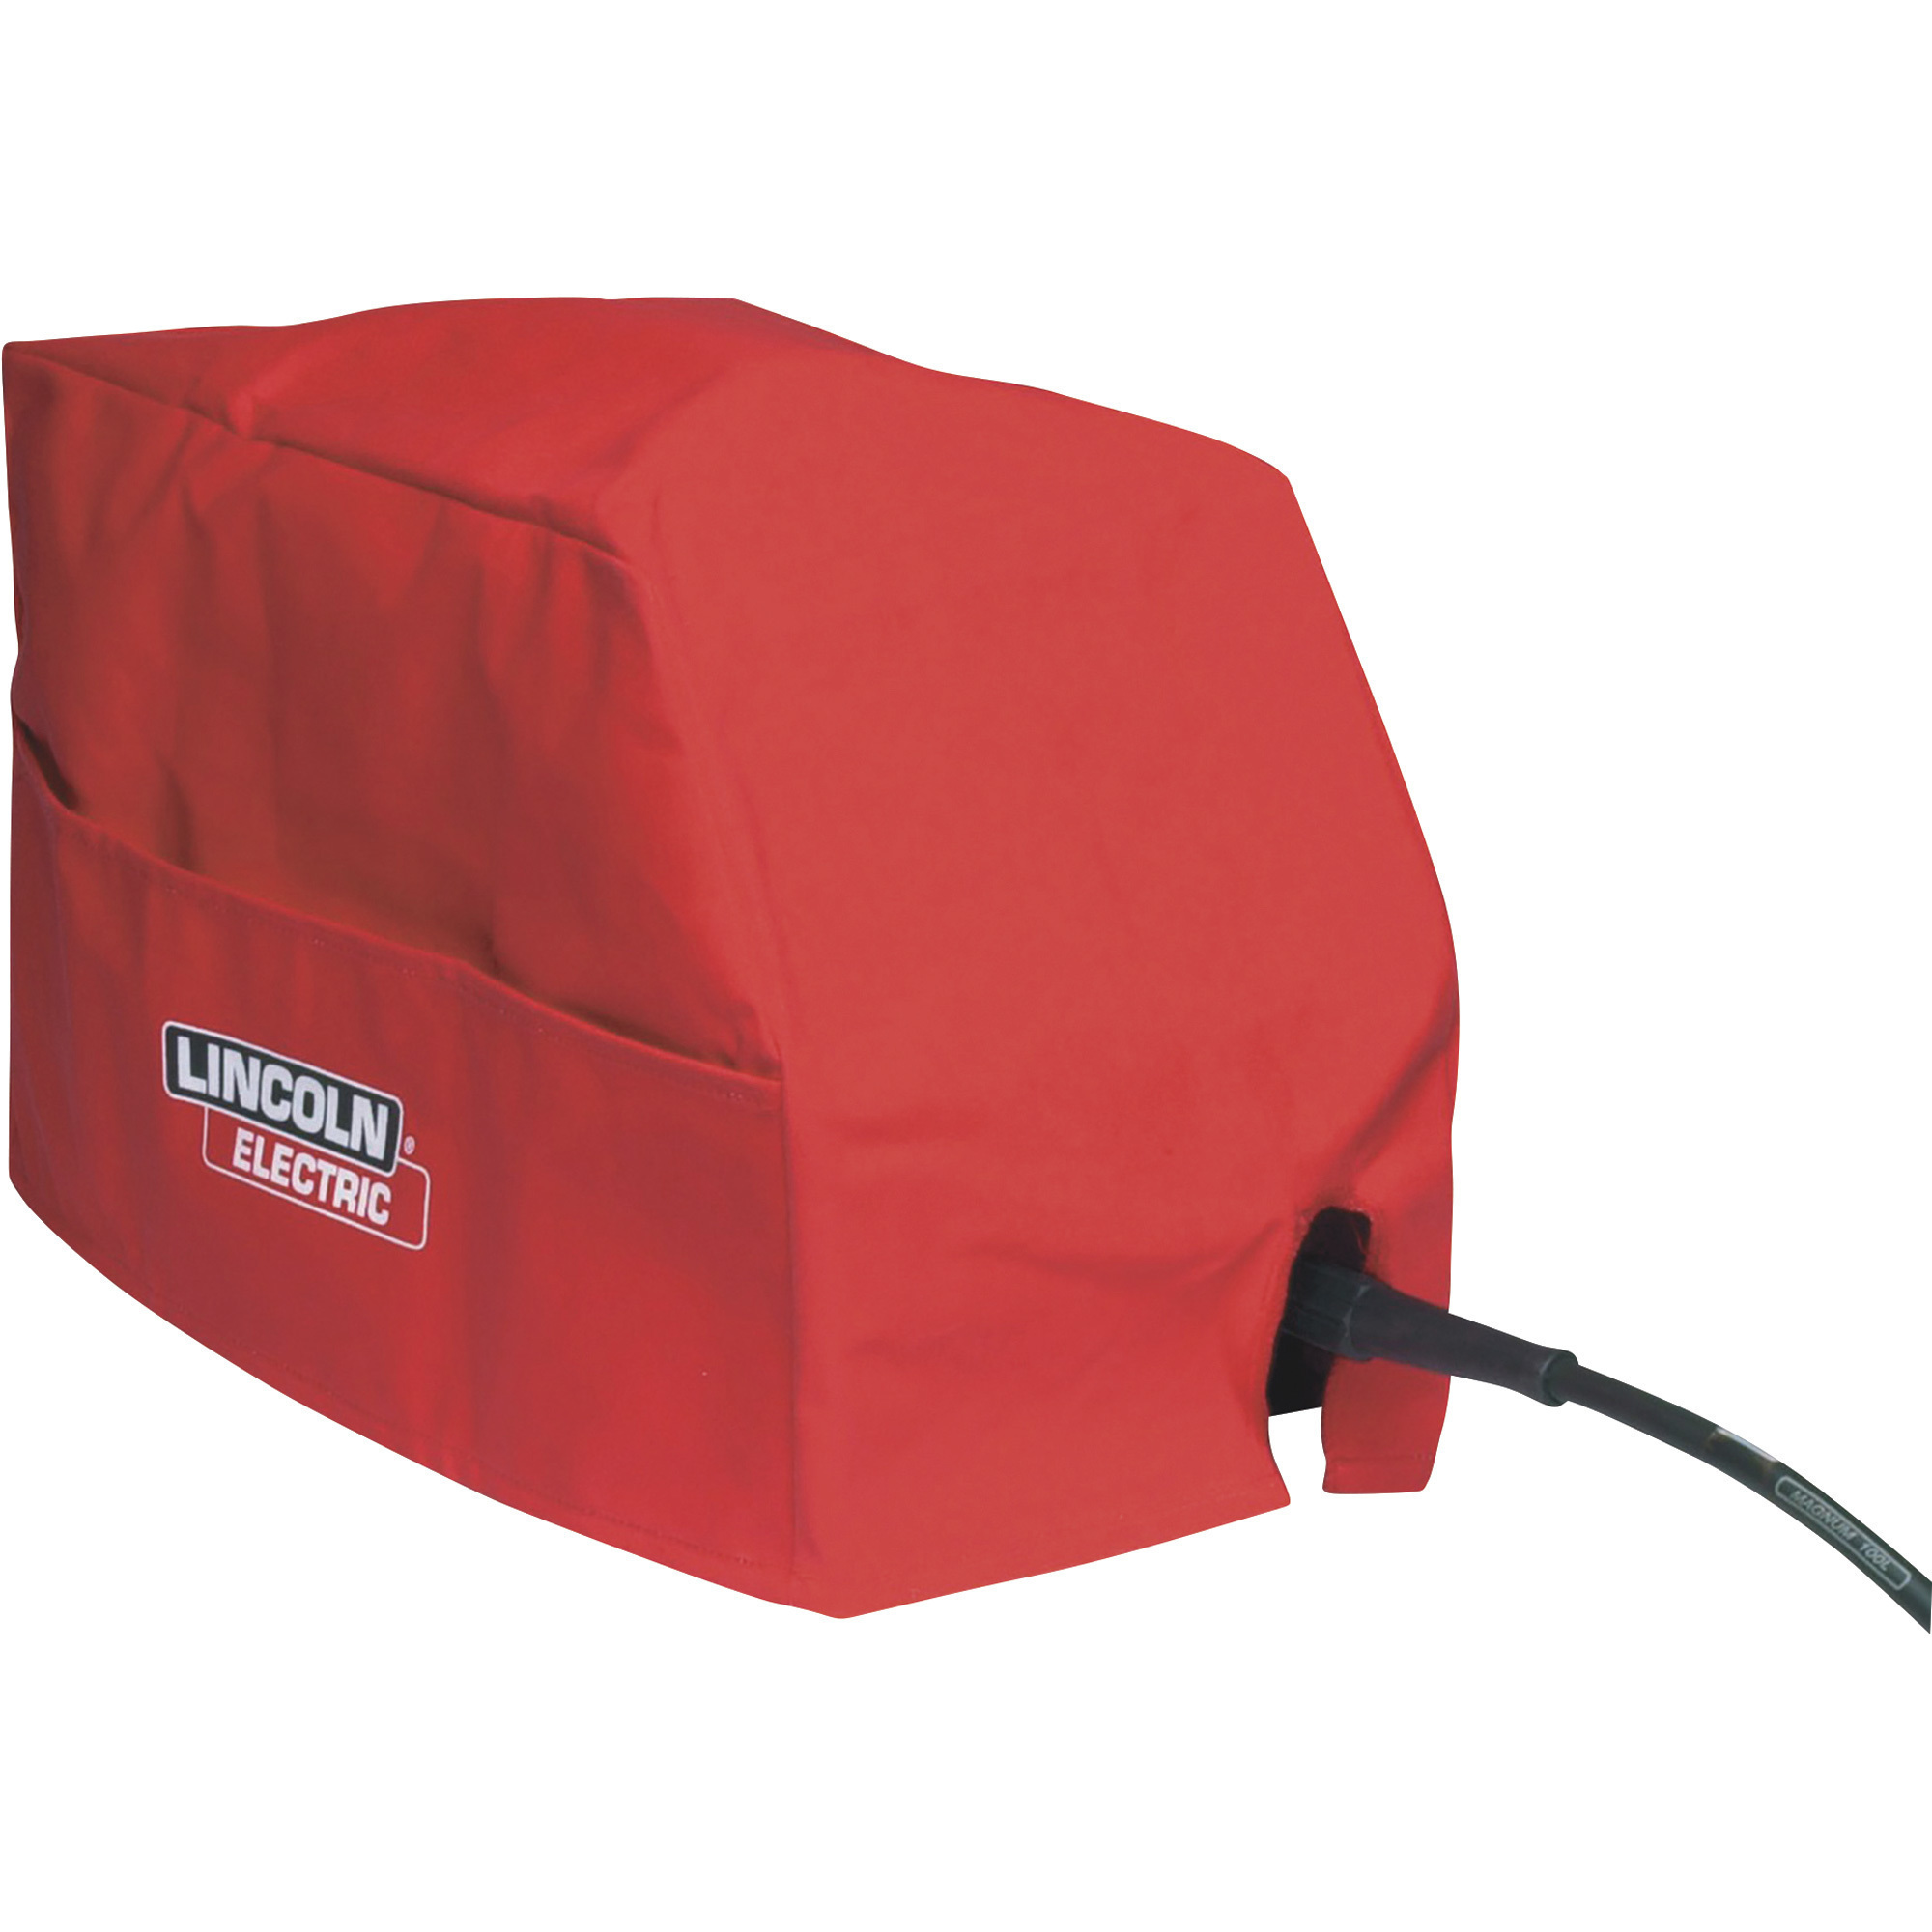 Lincoln Electric Welder Cover, Fits Small Wire-Feed Welders, Model KH495